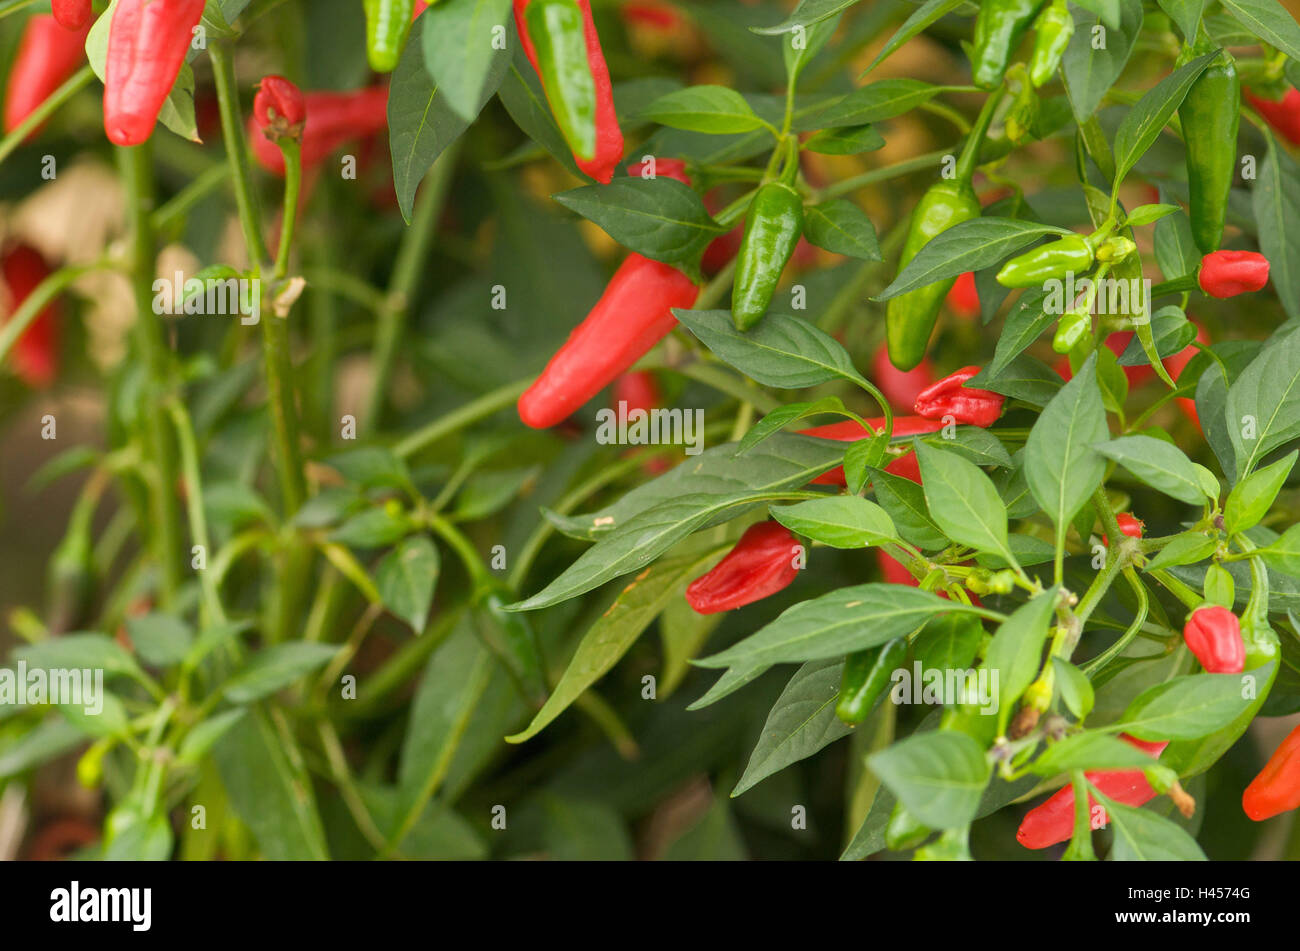 Plant, chili peppers, red, Chilli, spices, sharpness, the Far East, Asia, hot, piquant, cooking, paprika plant, spice plant, Chilli, pods, mature, Stock Photo